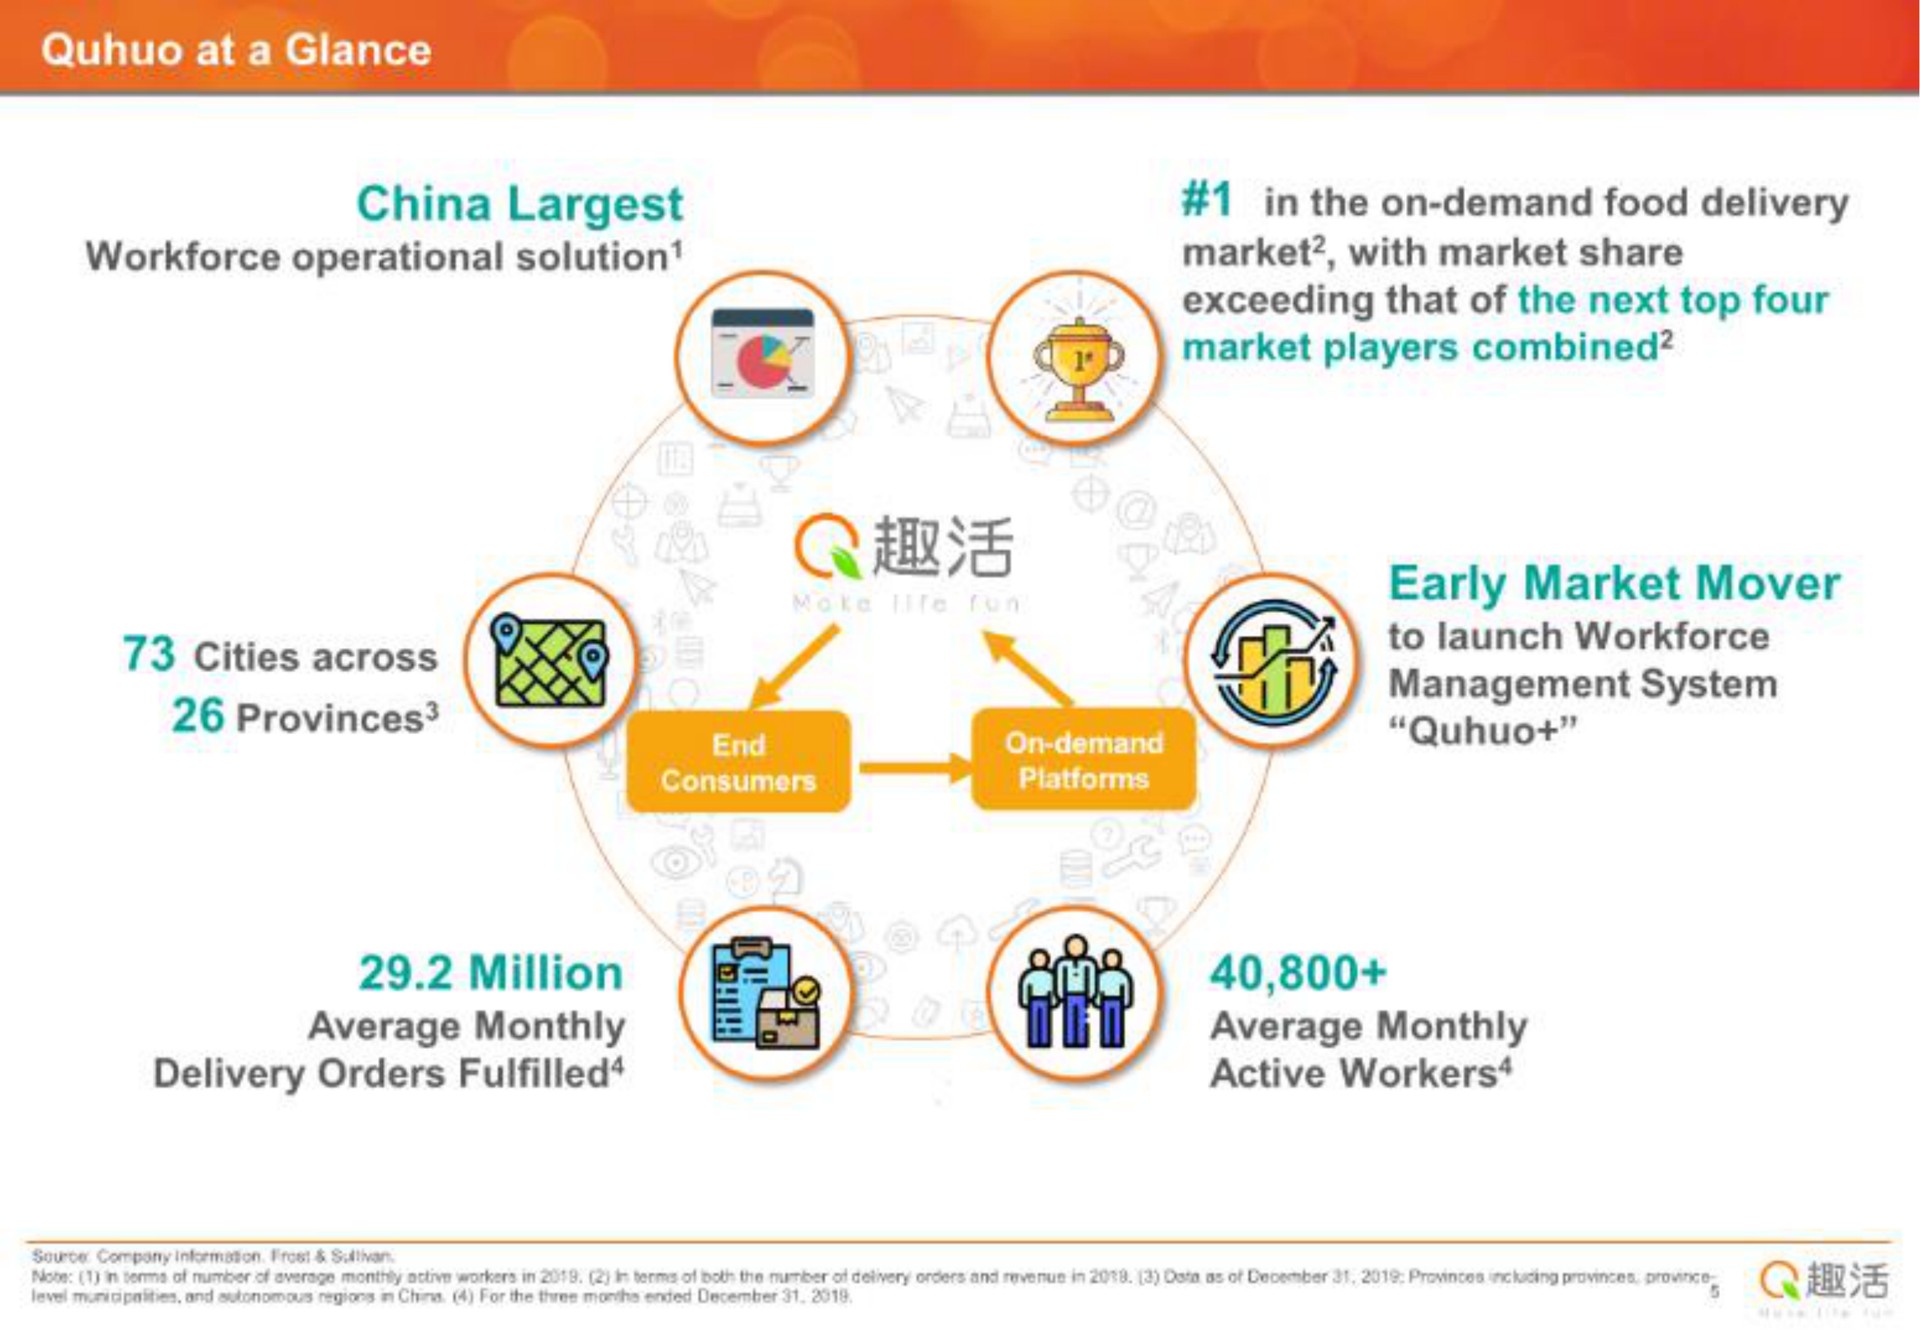 at a glance china operational solution in the on demand food delivery market with market share exceeding that of the next top four market players combined cities across provinces qss early market mover to launch management system million average monthly delivery orders average monthly active workers | Quhuo